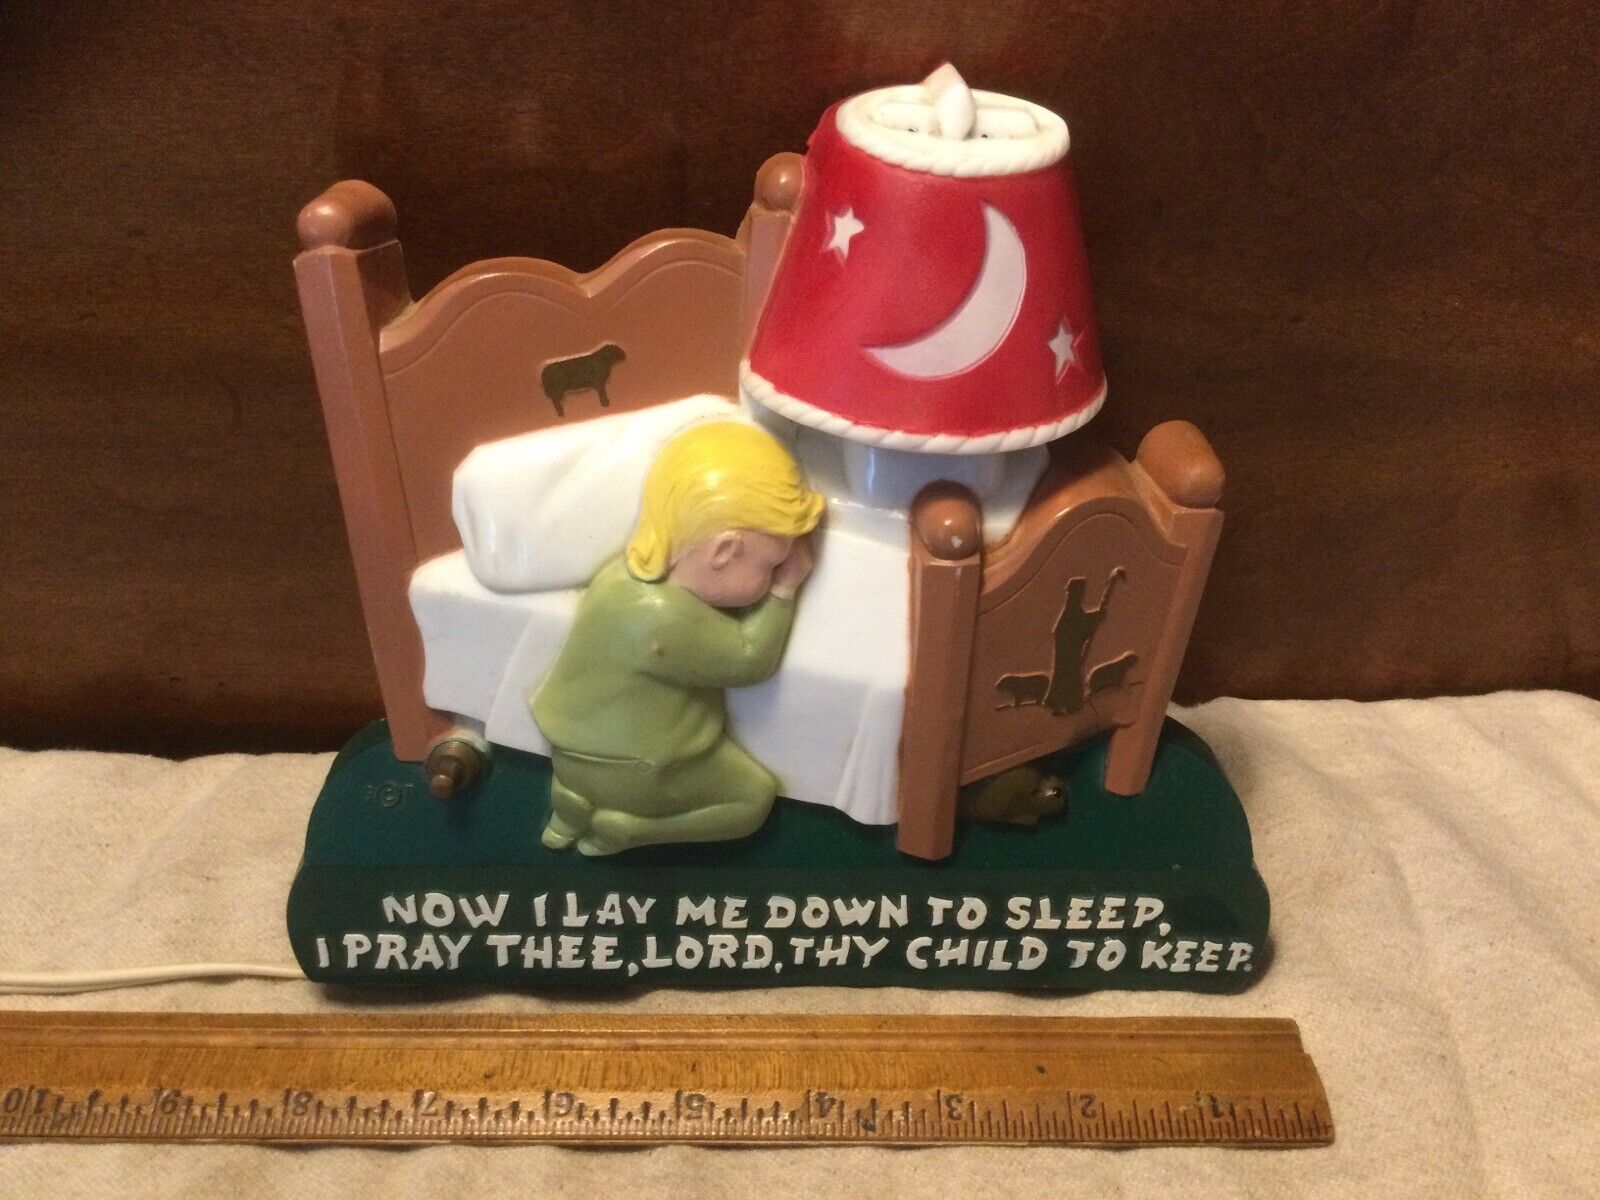 Vintage 1950s “Now I Lay Me Down to Sleep” Child’s Wall Mount Night Light-Works